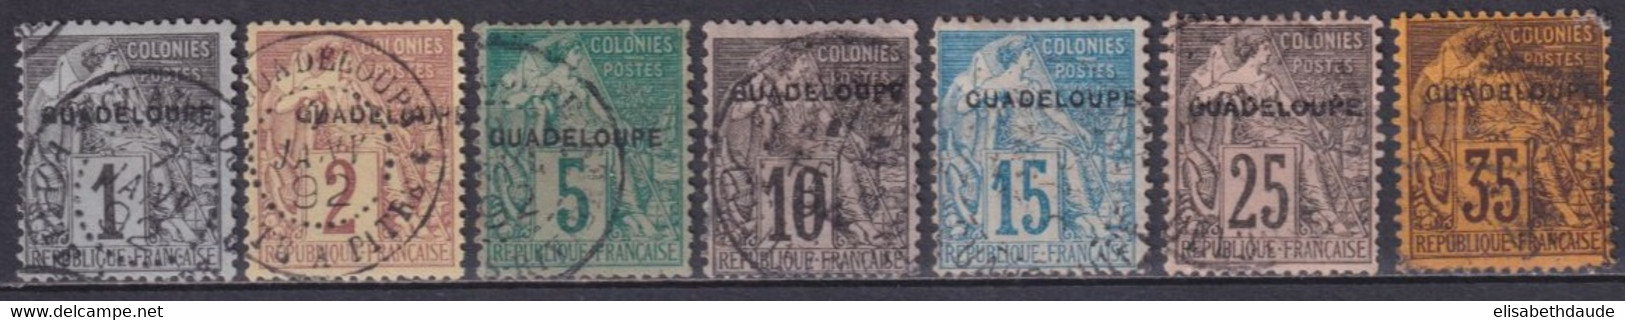 GUADELOUPE - YVERT N° 14/19+21+23 OBLITERES - COTE = 142 EUR. - - Used Stamps